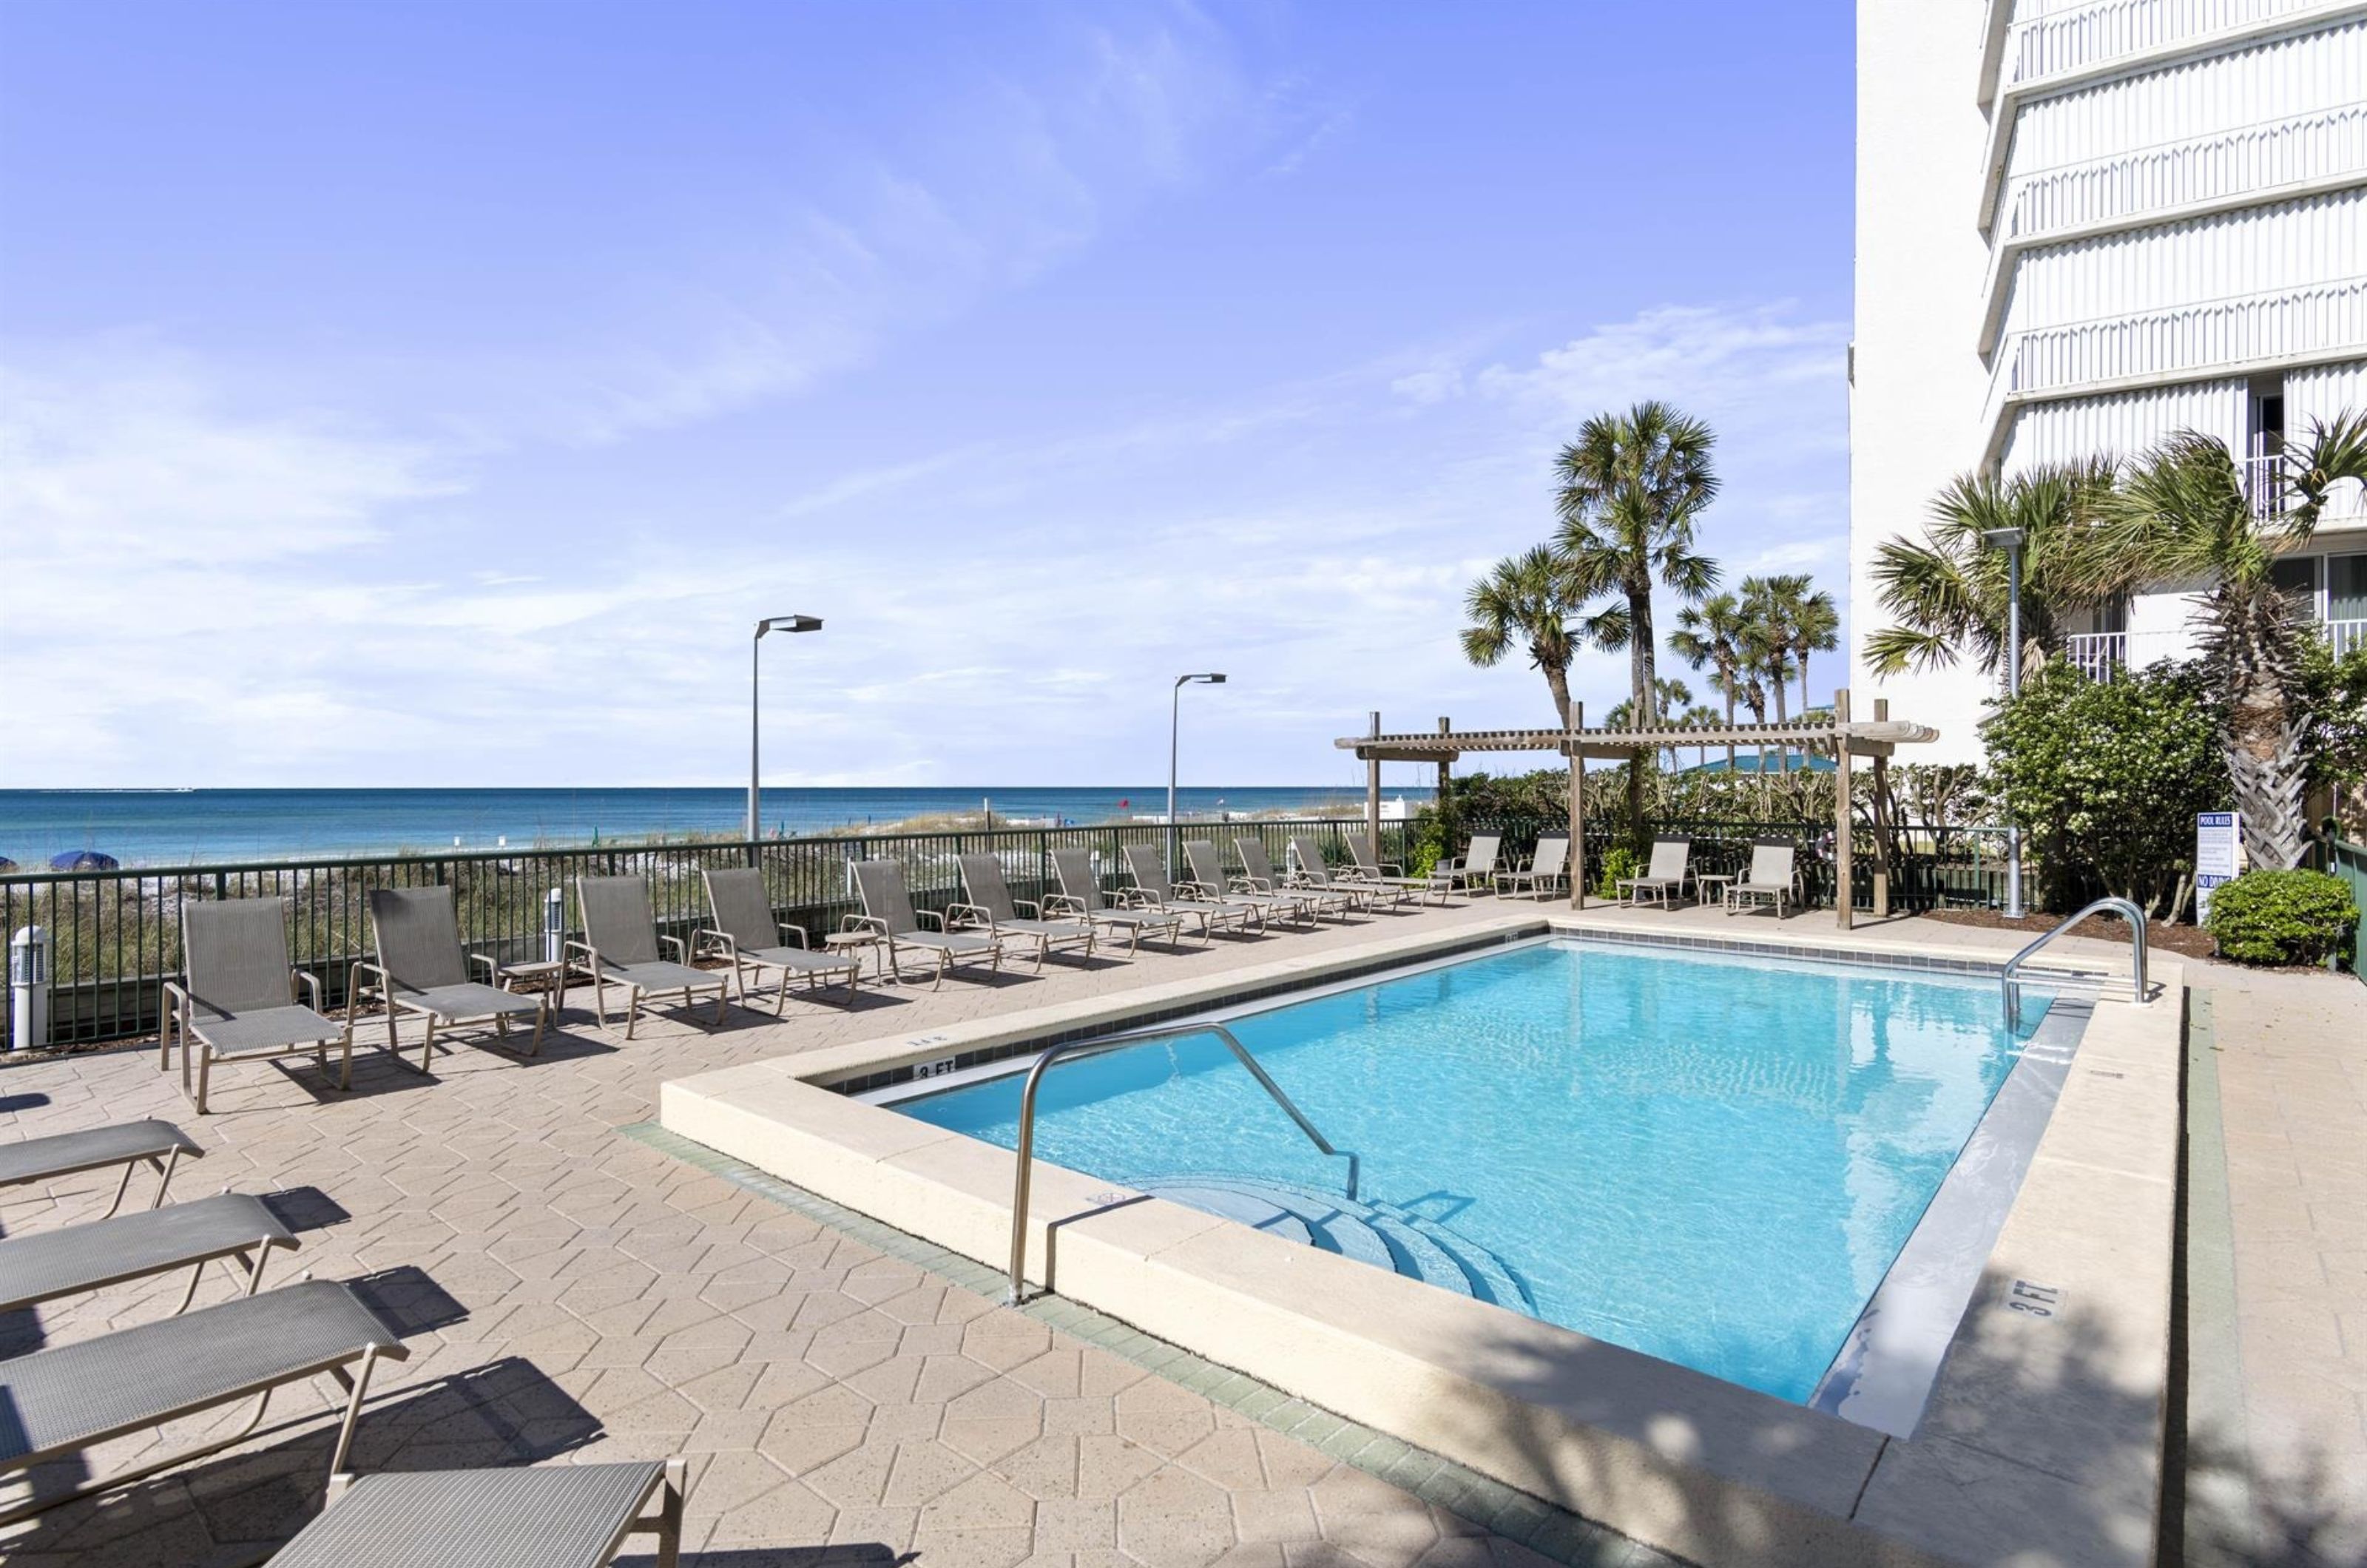 The outdoor pool and pool deck at Destin Beach Club in Destin Florida 